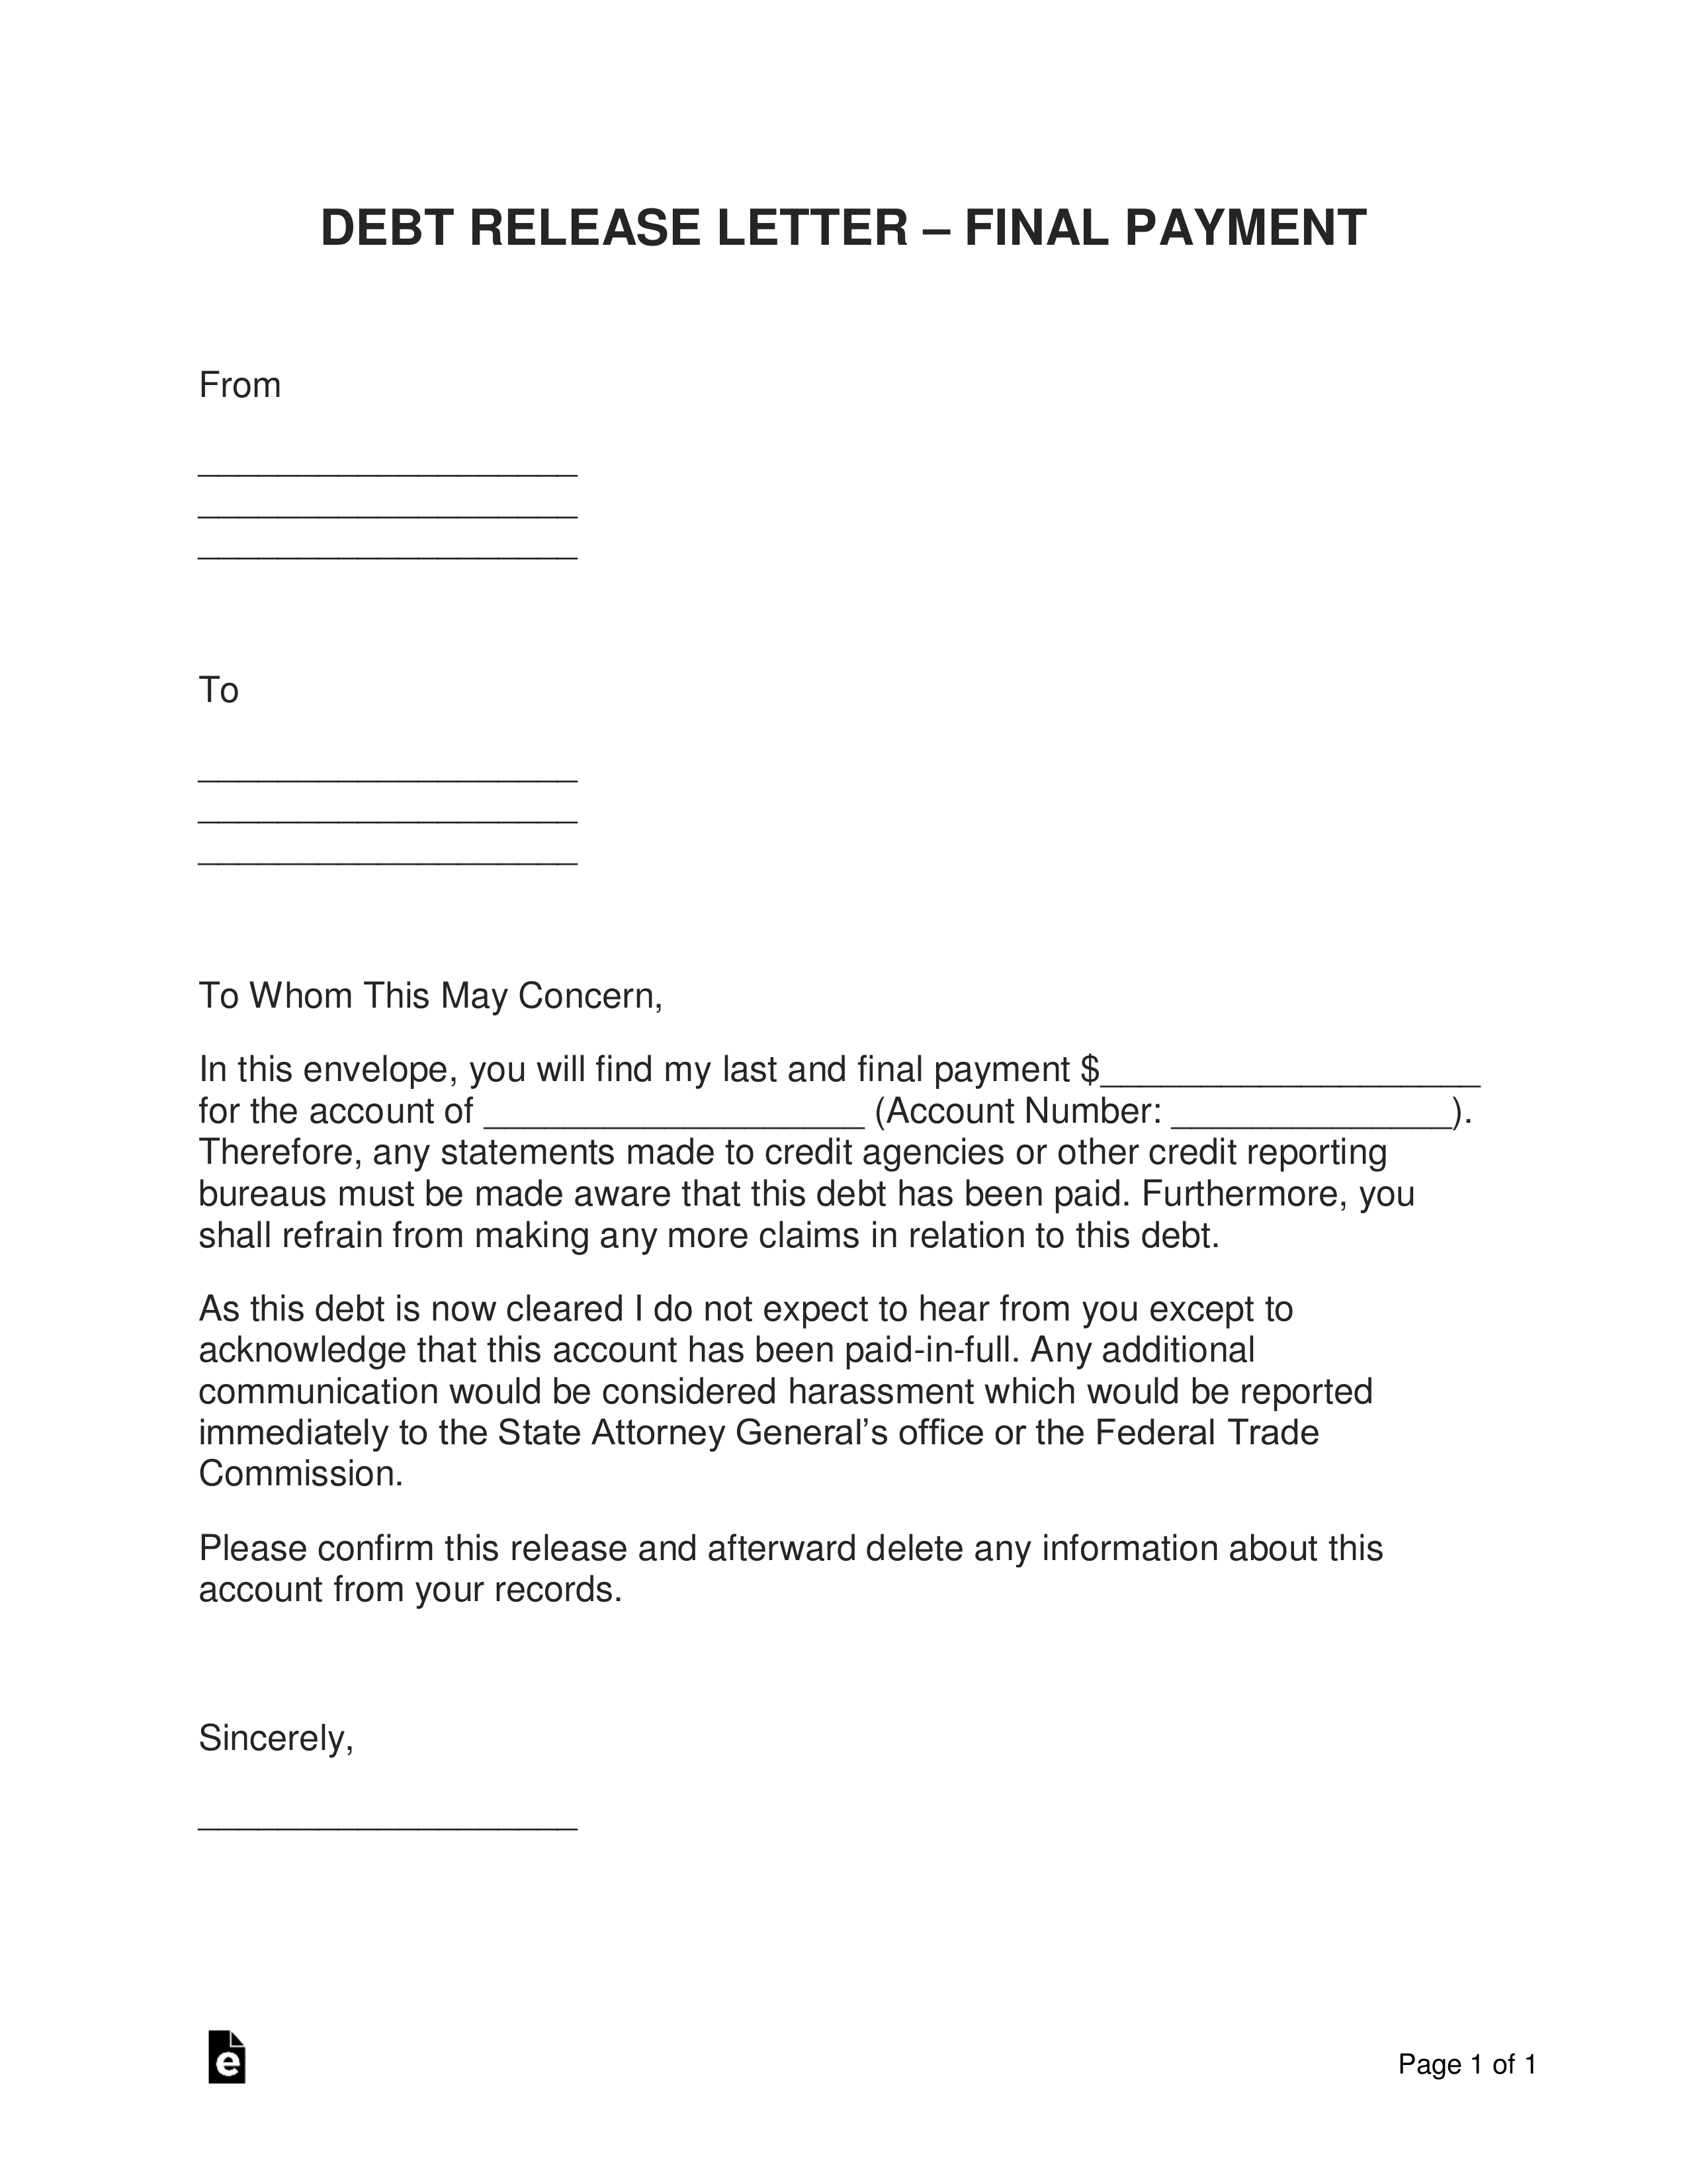 free-debt-release-letter-after-final-payment-pdf-word-eforms